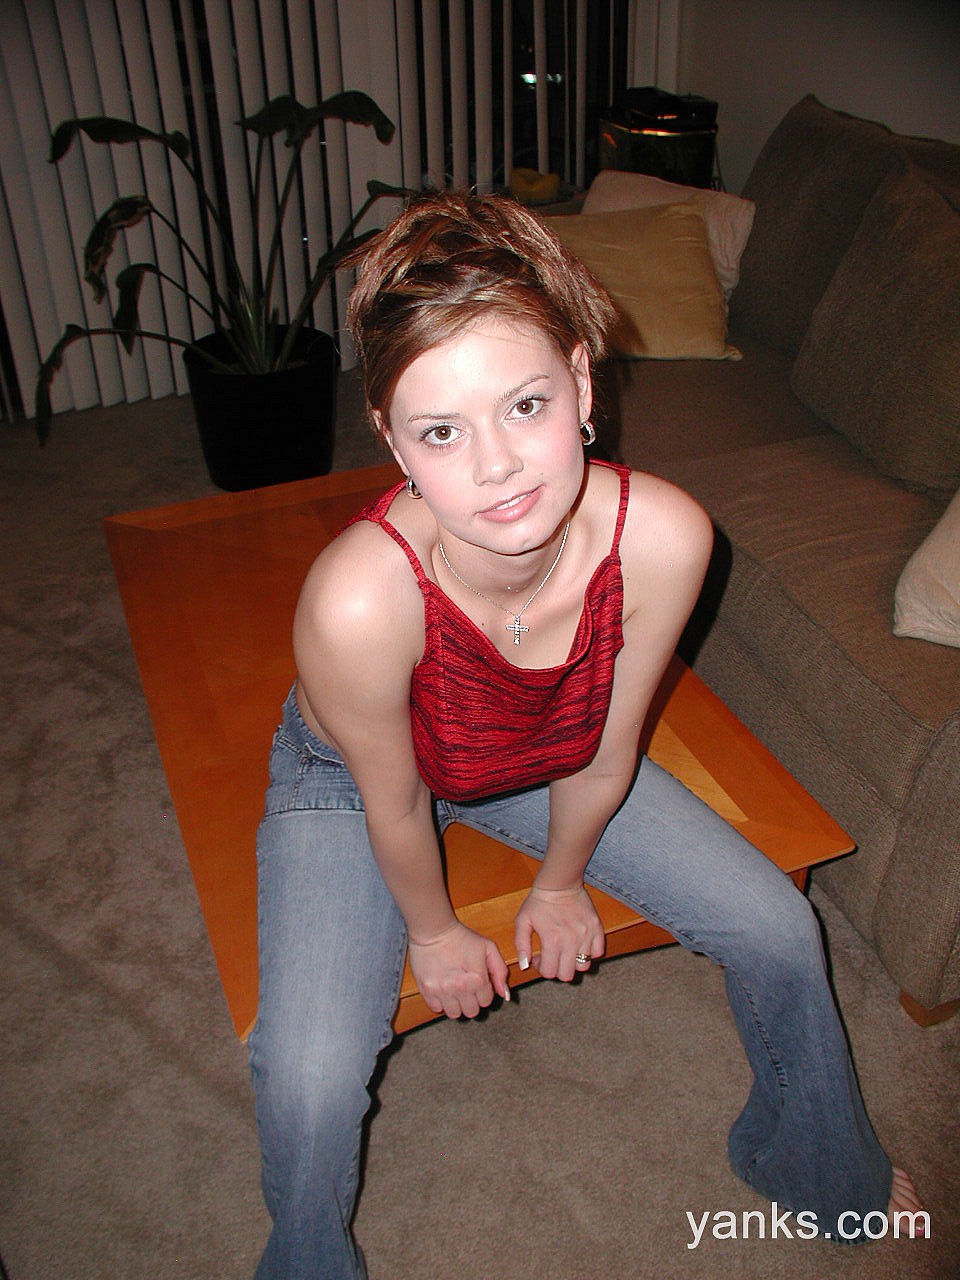 Redhead teen Kelly flaunts sexy feet & sheds jeans to show natural hairy bush photo porno #423309526